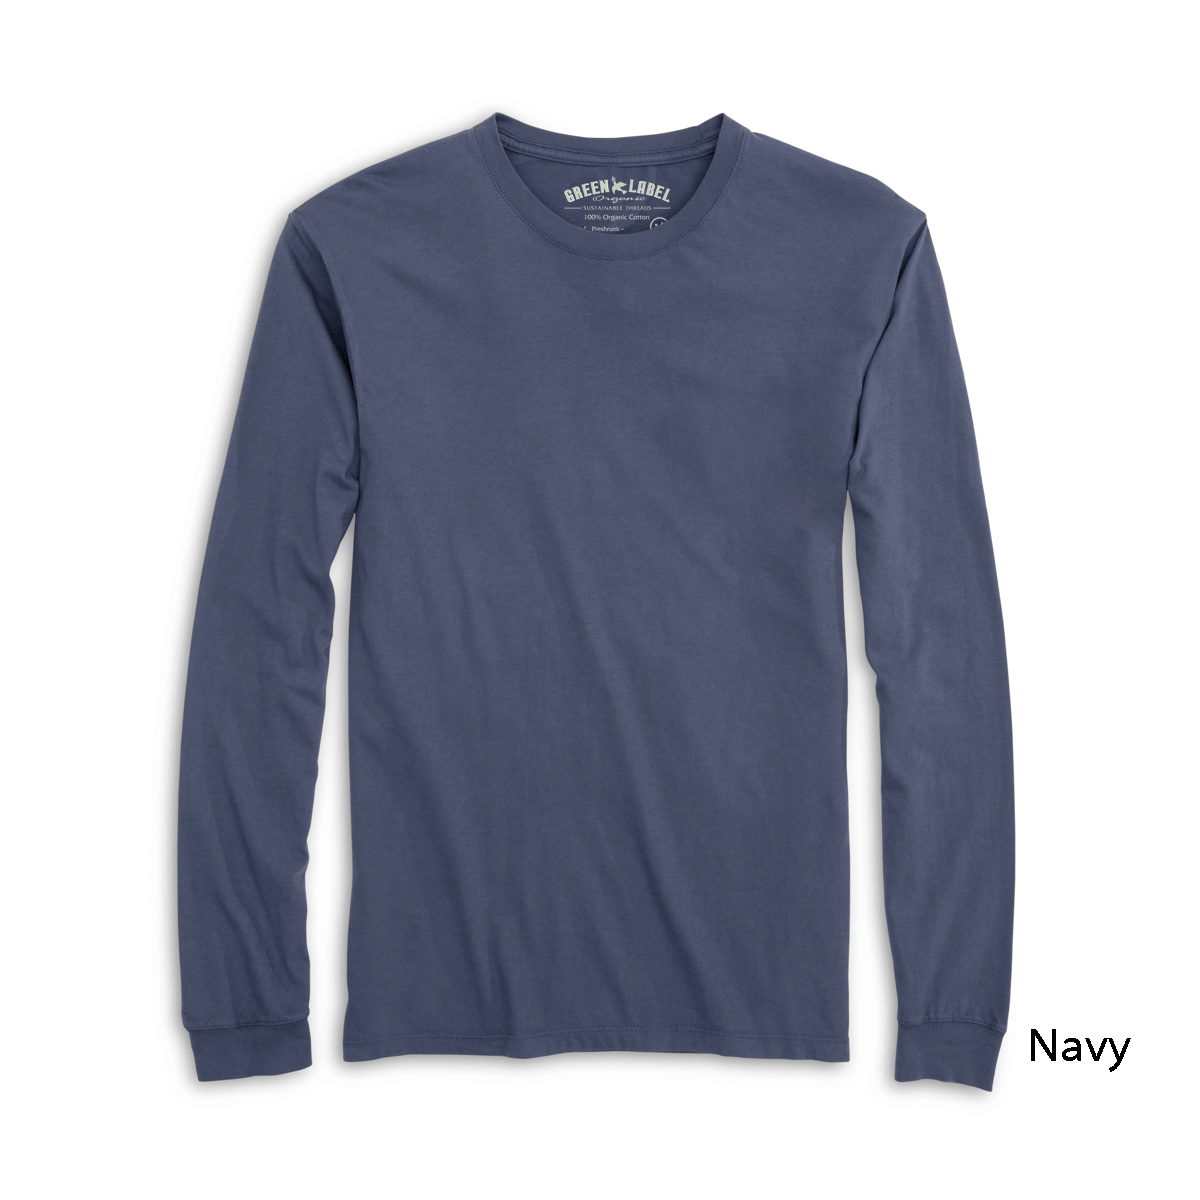 https://cdn9.bigcommerce.com/s-e6hs92zf/products/783/images/5424/Solid-Mens-Long-Sleeve-Navy__21162.1692905346.1280.1280.gif?c=2